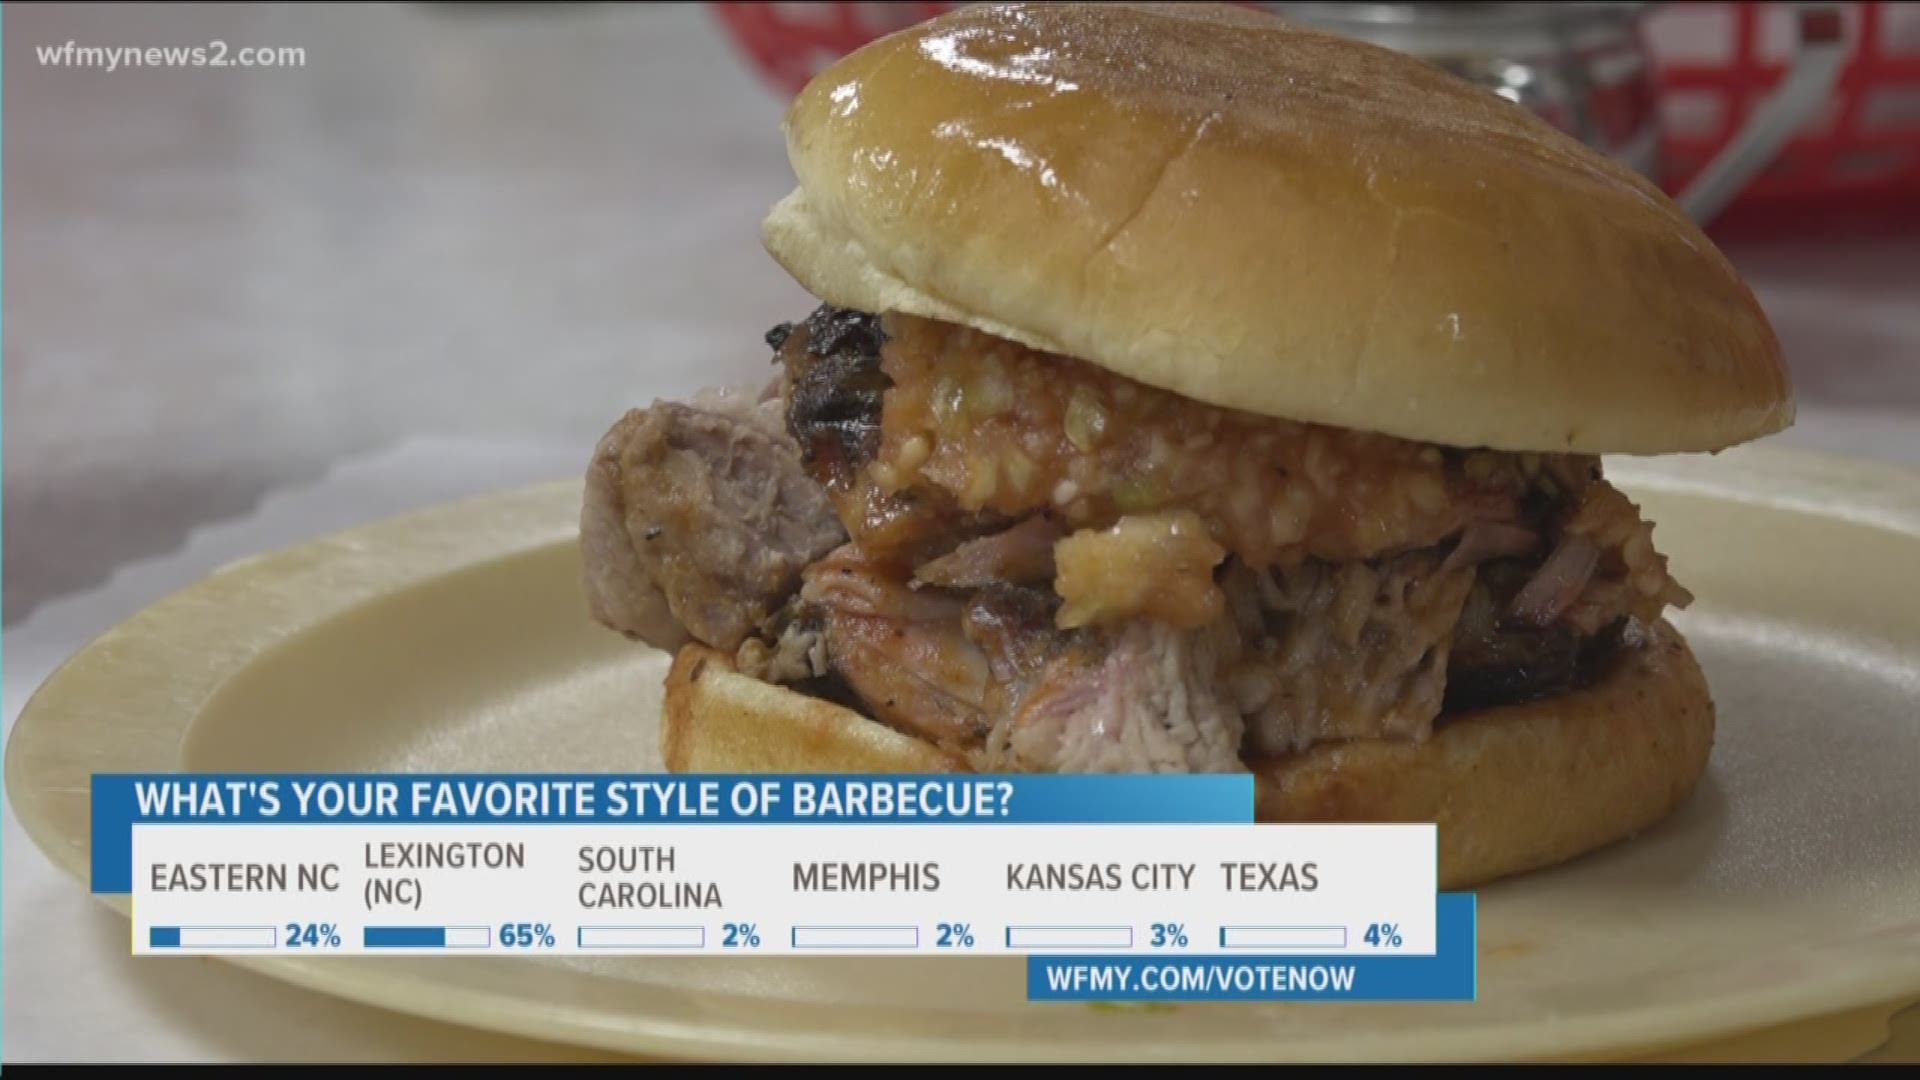 Stephen colbert took a swing at North carolina barbecue on the Late show. Now NC is swinging back.